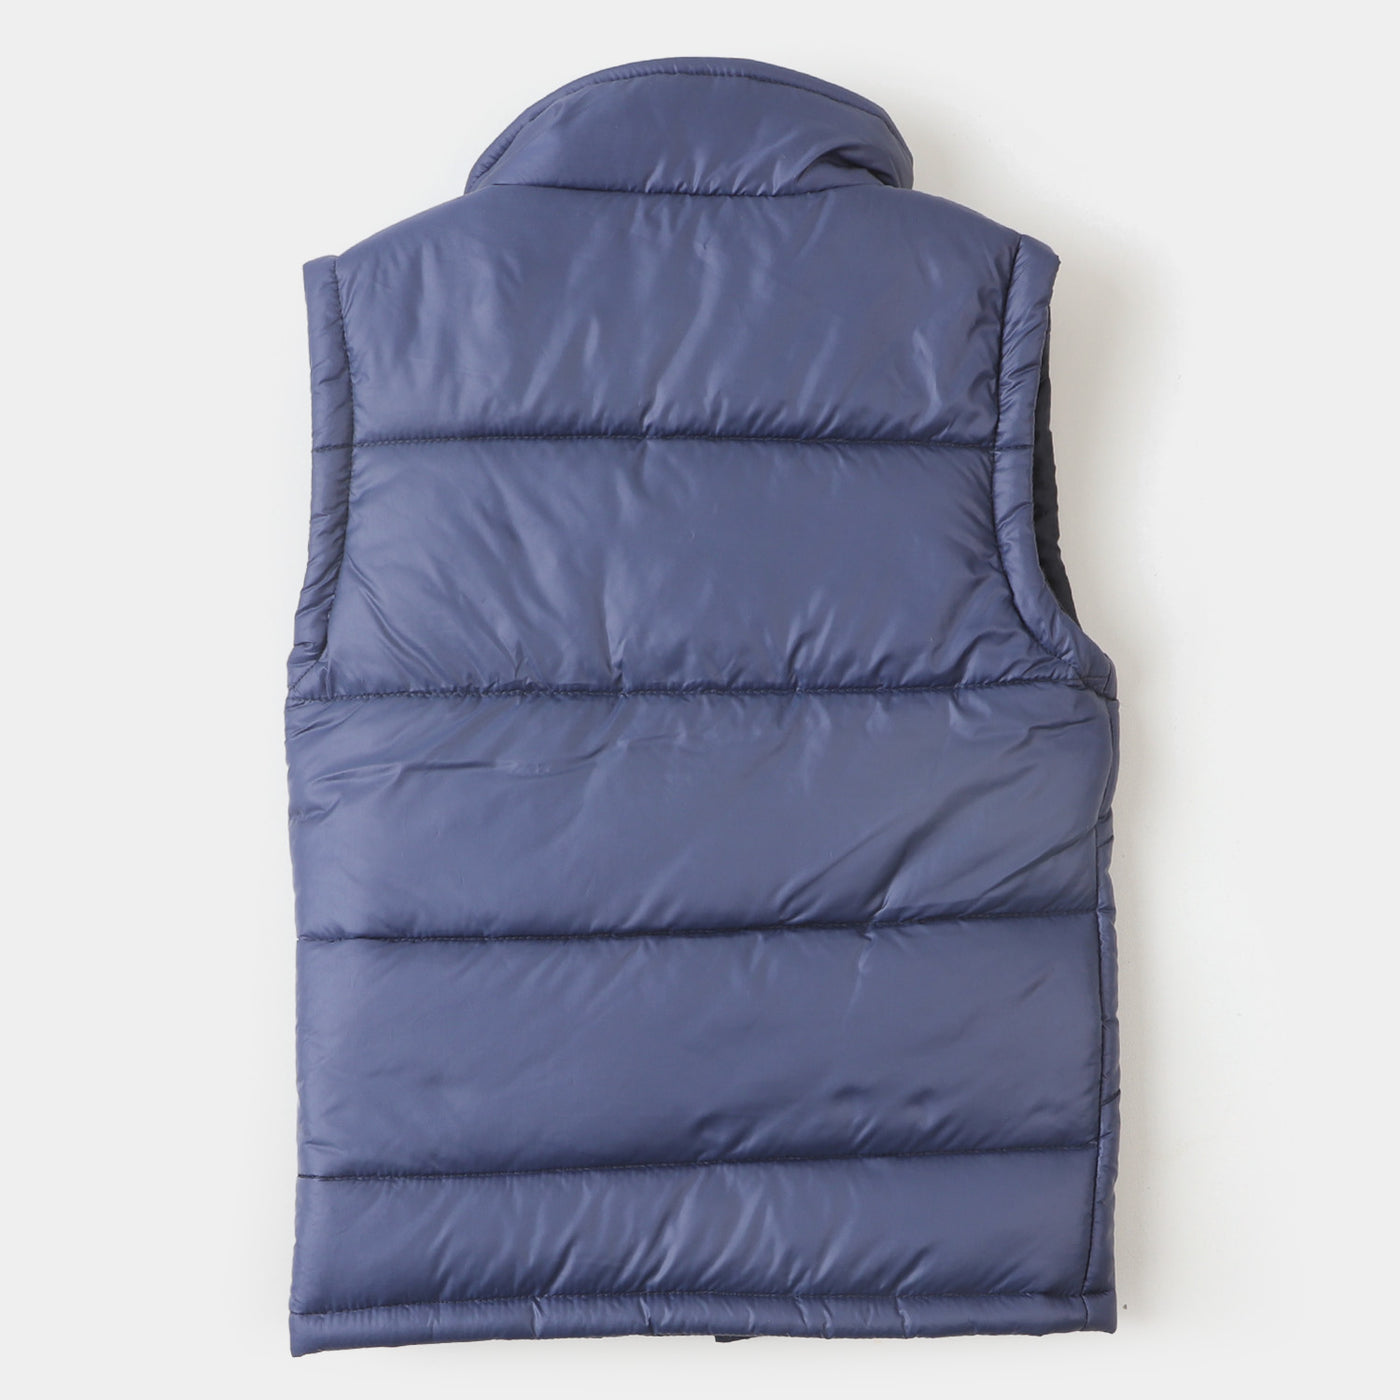 Boys Quilted Zipper jacket -Navy